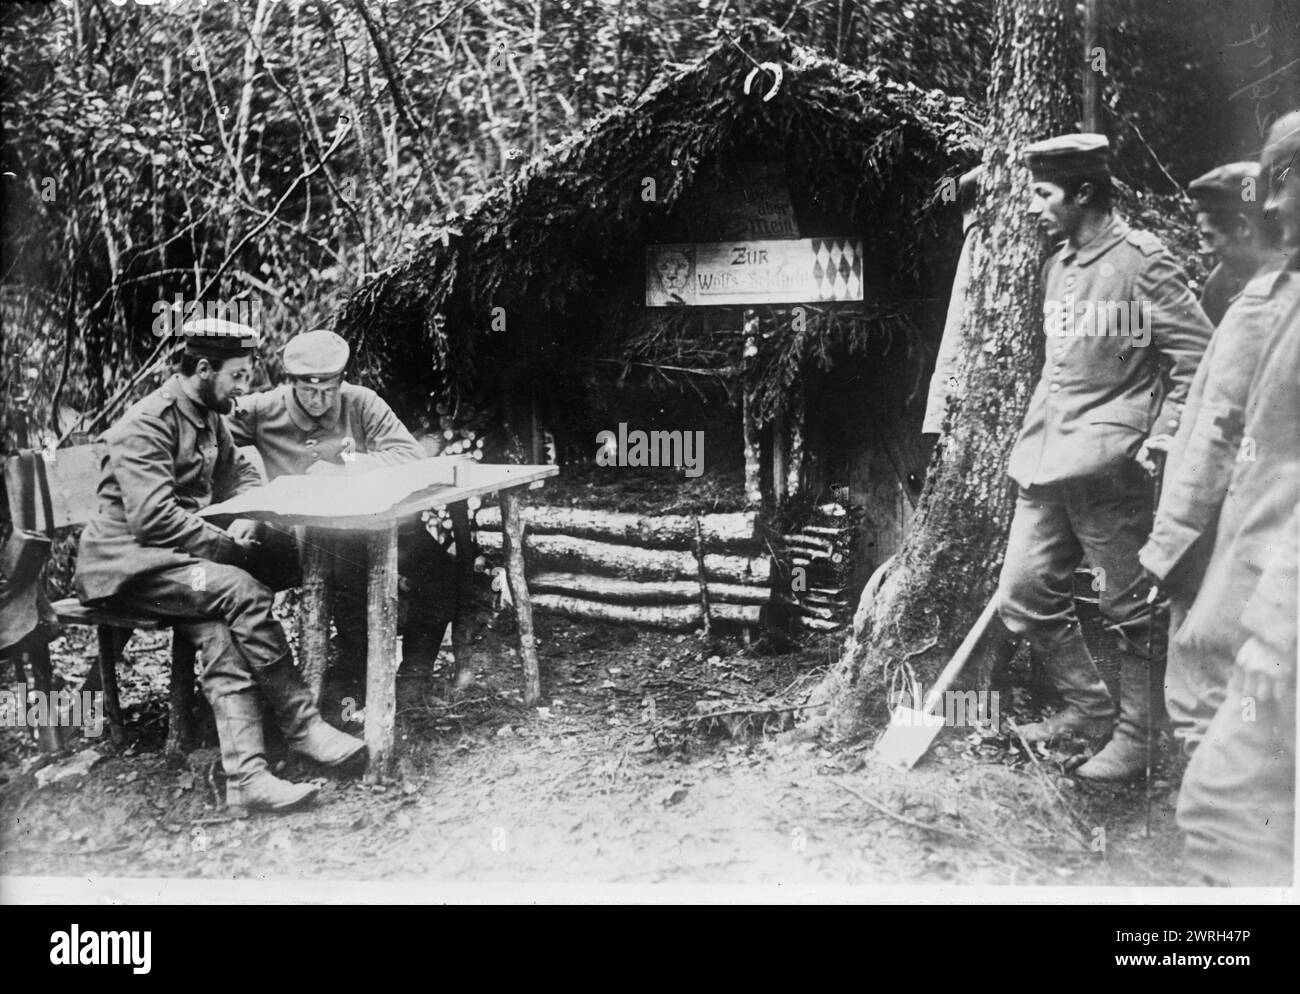 German soldiers in the Aisne District, 26 Dec 1914 (date created or published later). German soldiers with a shelter in the Aisne District, France during World War I. Stock Photo